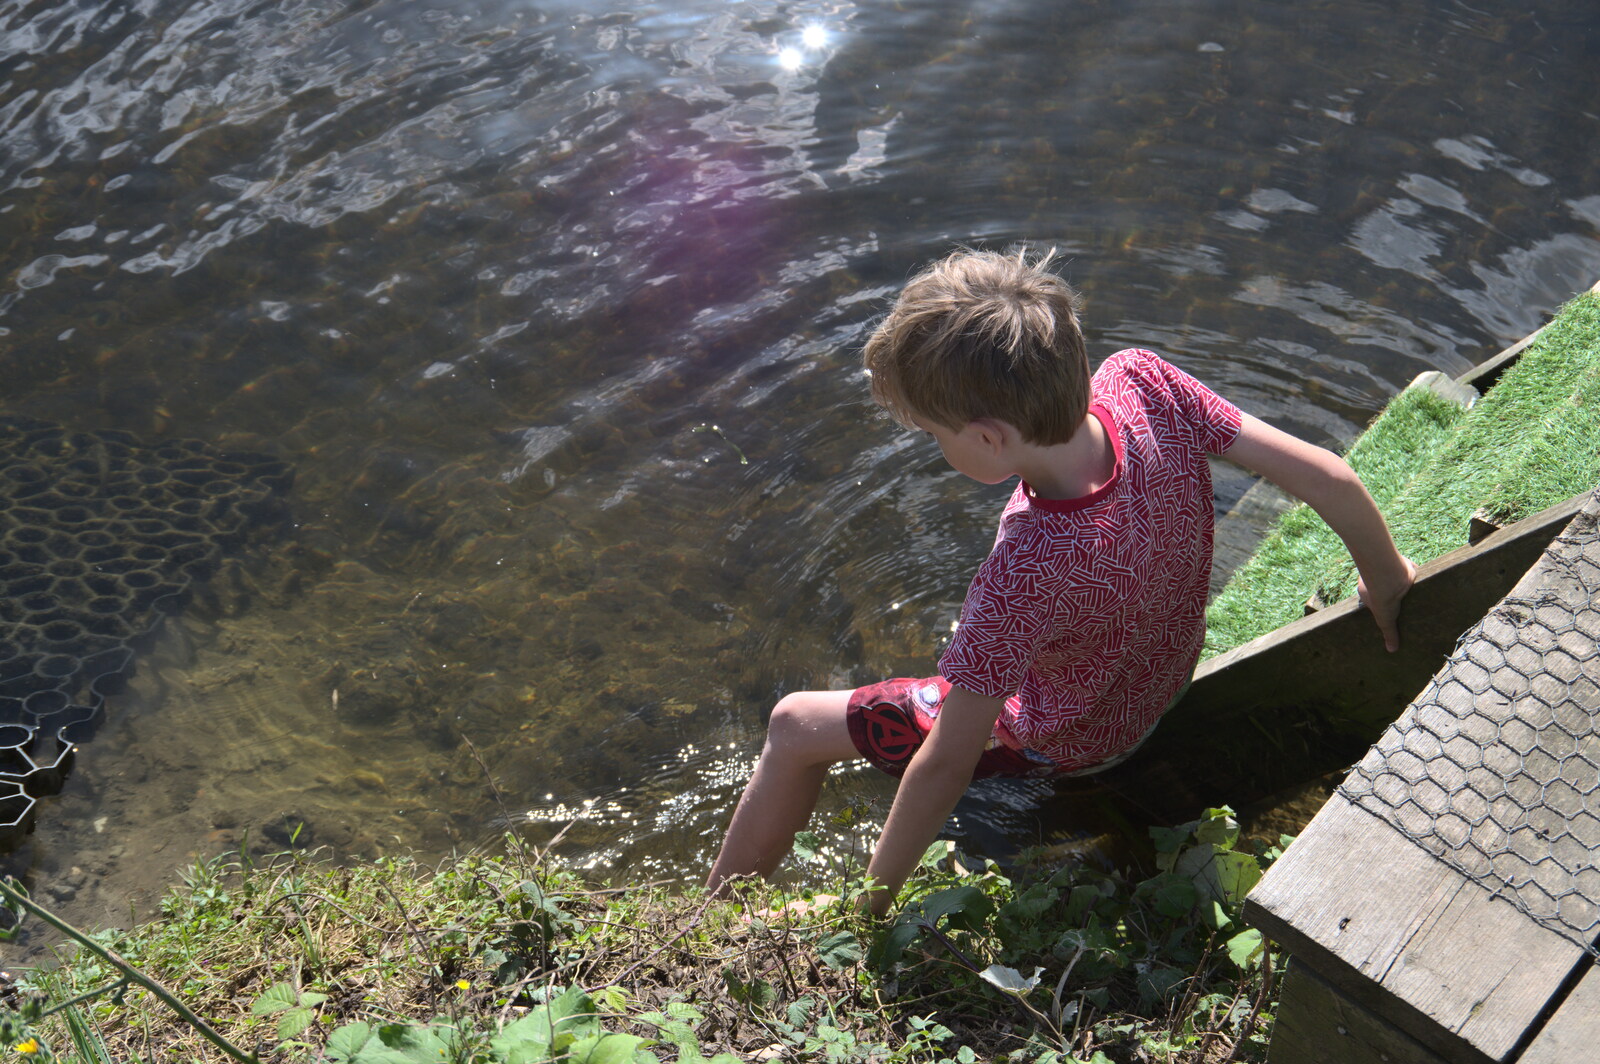 Camping at Three Rivers, Geldeston, Norfolk - 5th September 2020: Harry sticks his feet in the river